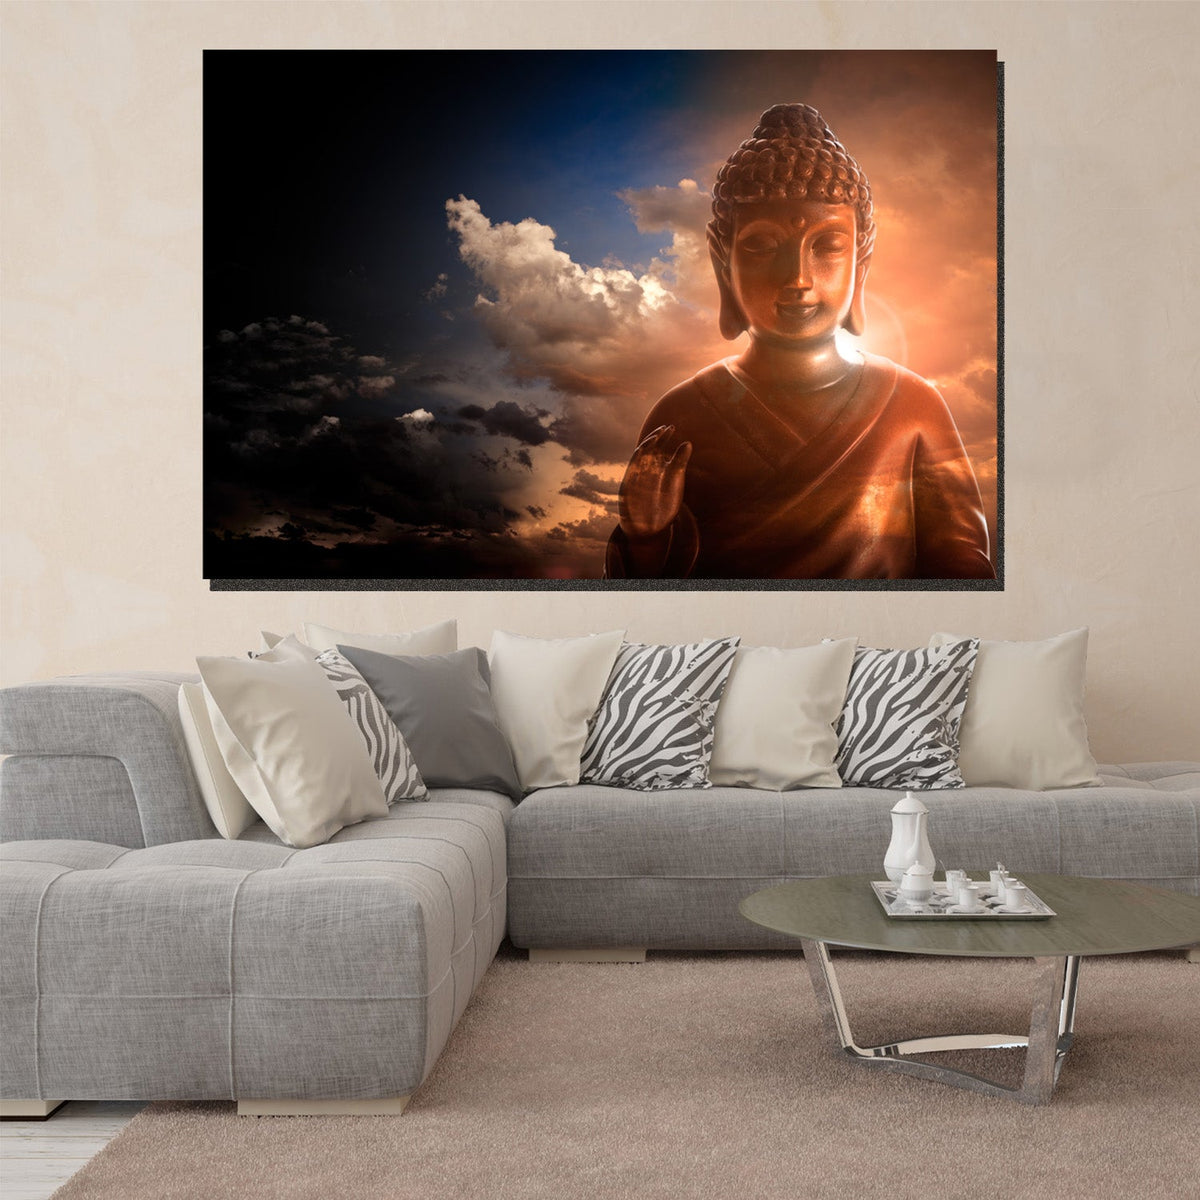 https://cdn.shopify.com/s/files/1/0387/9986/8044/products/BuddhaBlessingCanvasArtprintStretched-1.jpg